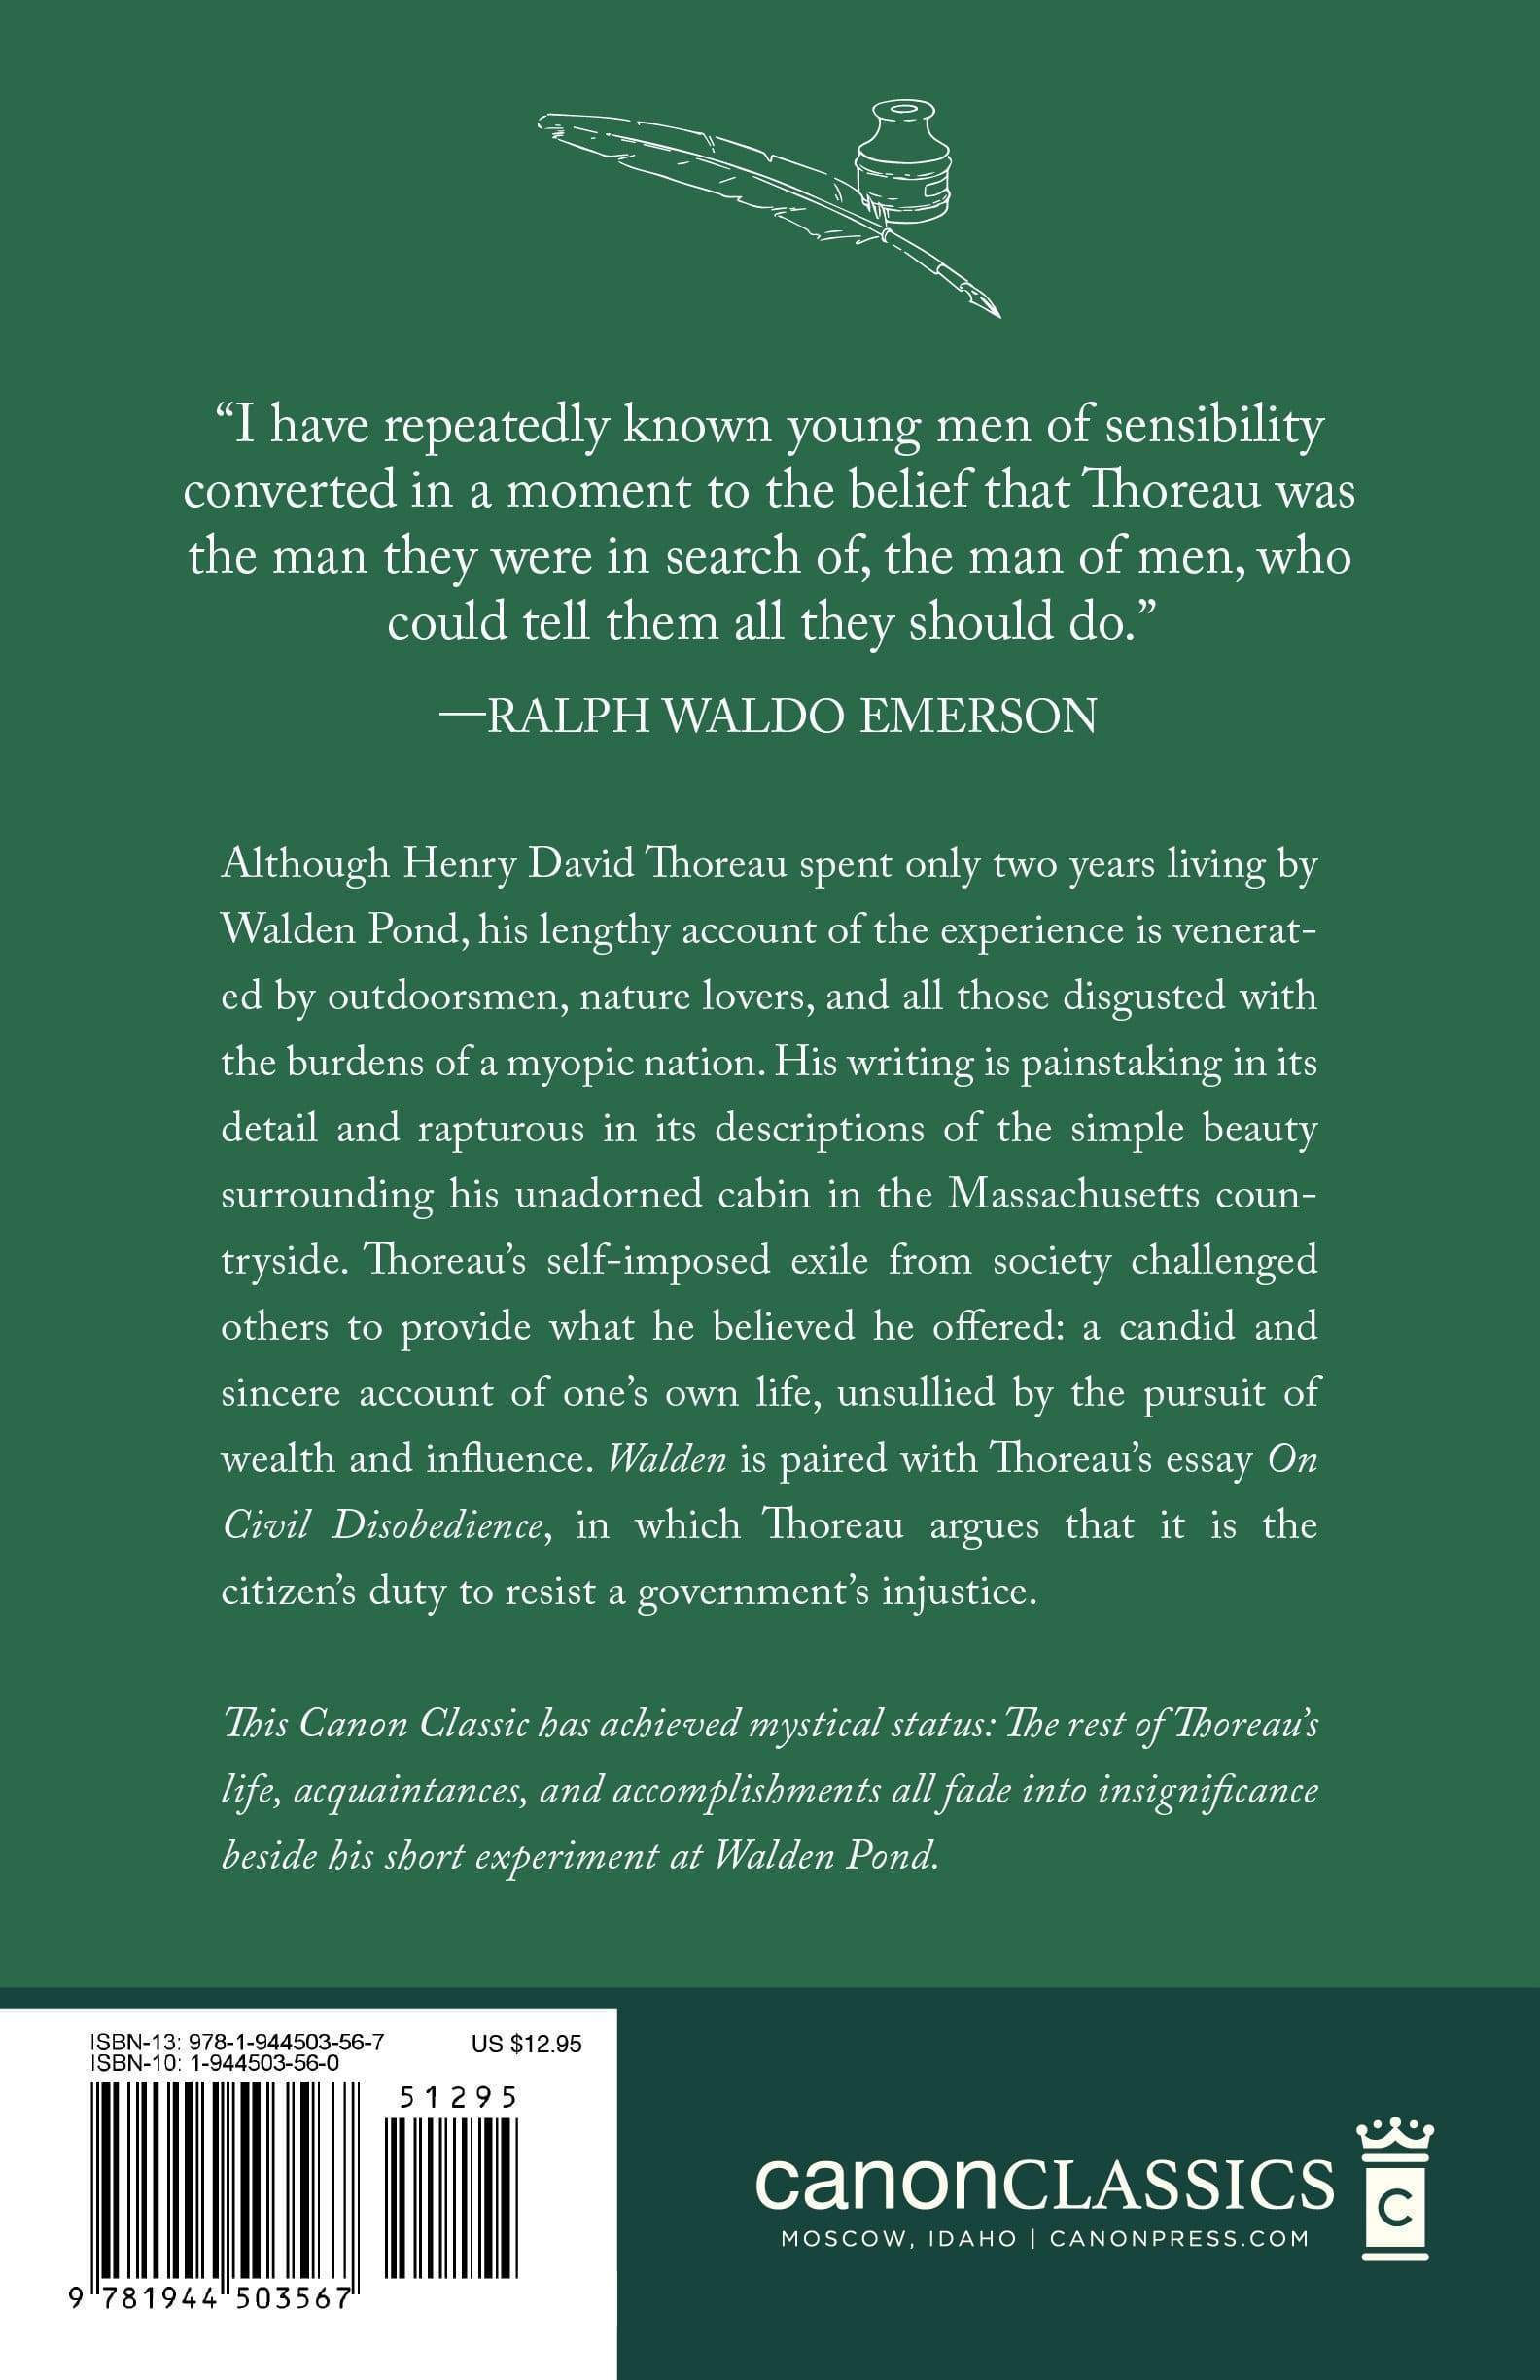 Walden and Civil Disobedience (Worldview Edition)